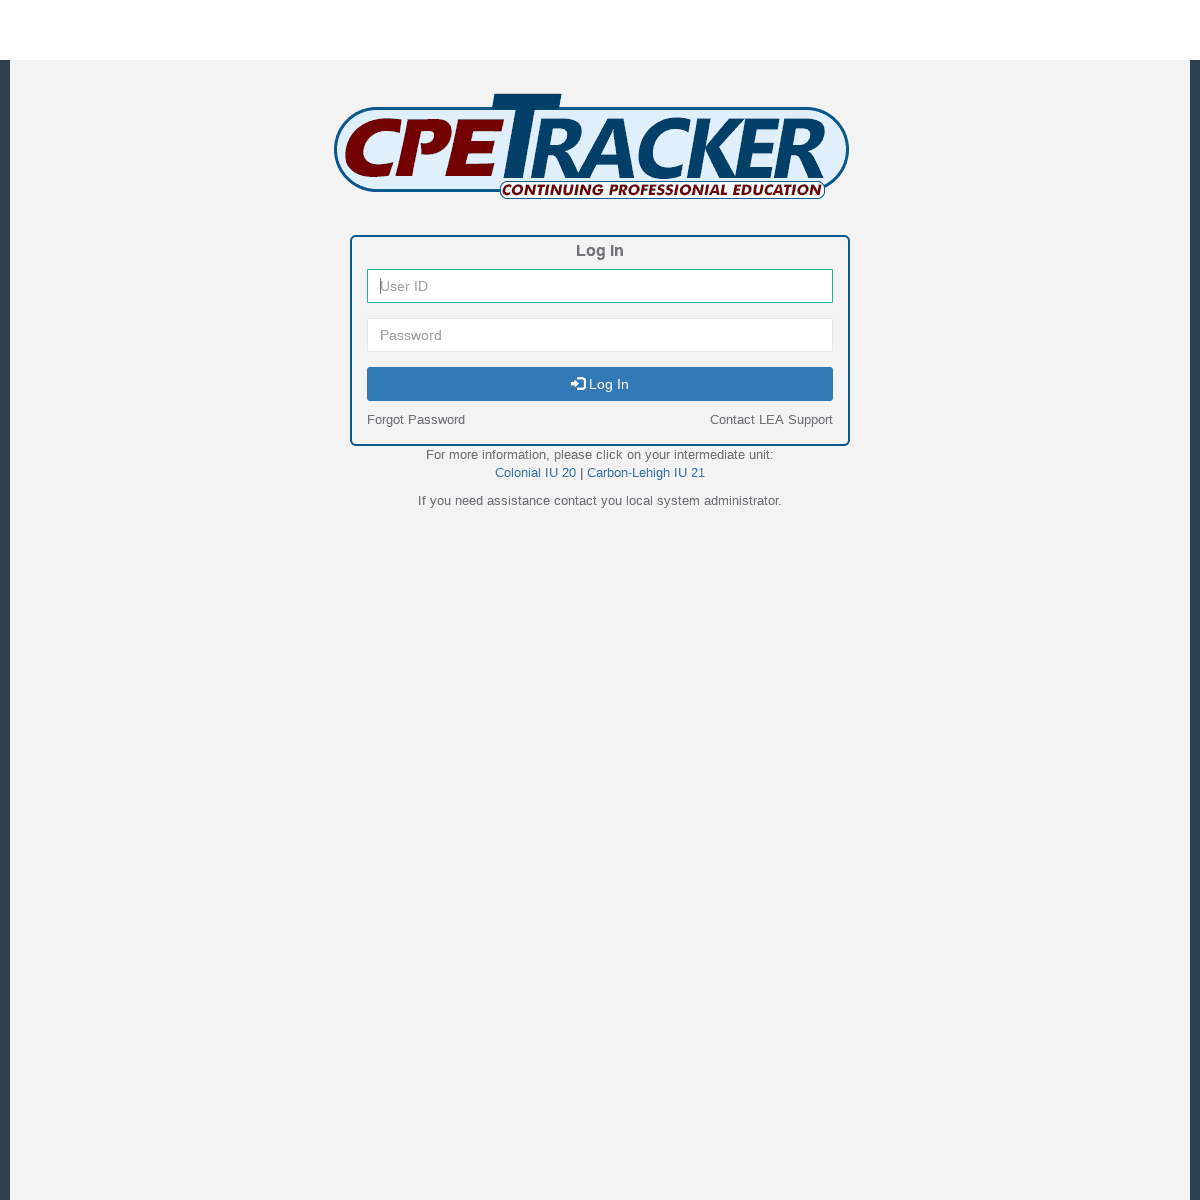 A complete backup of cpetracker.org